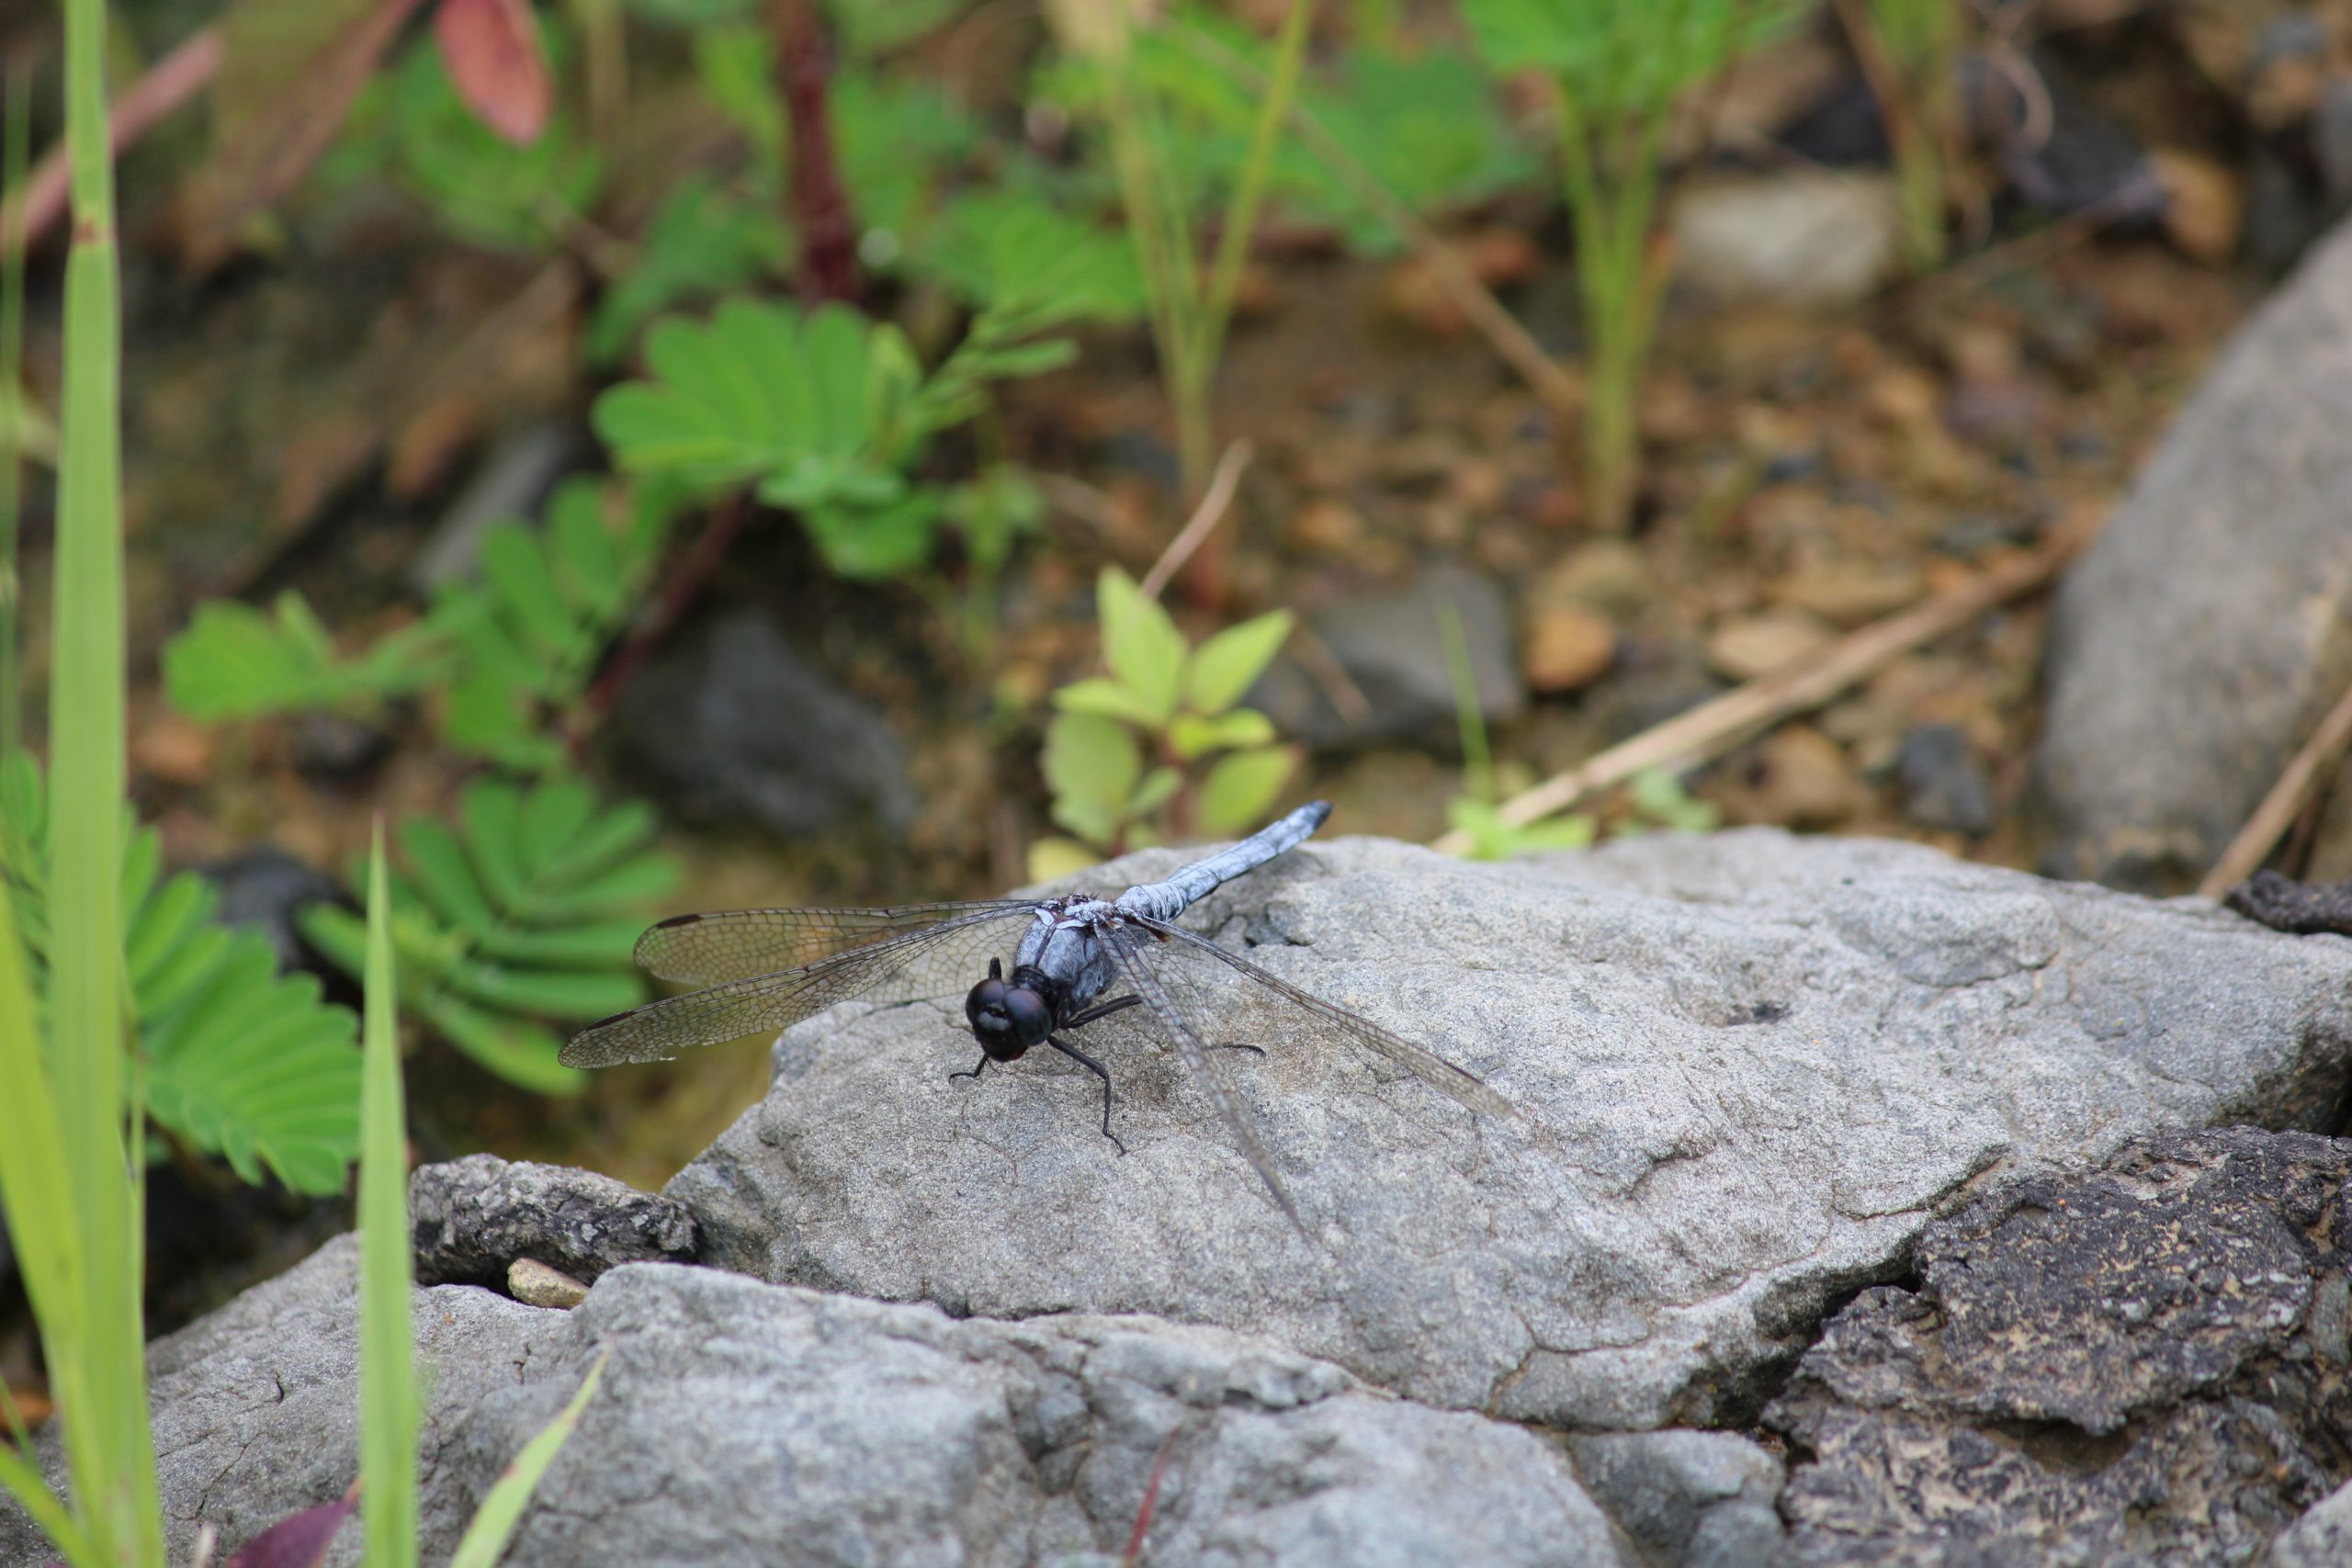 A dragonfly on a rock